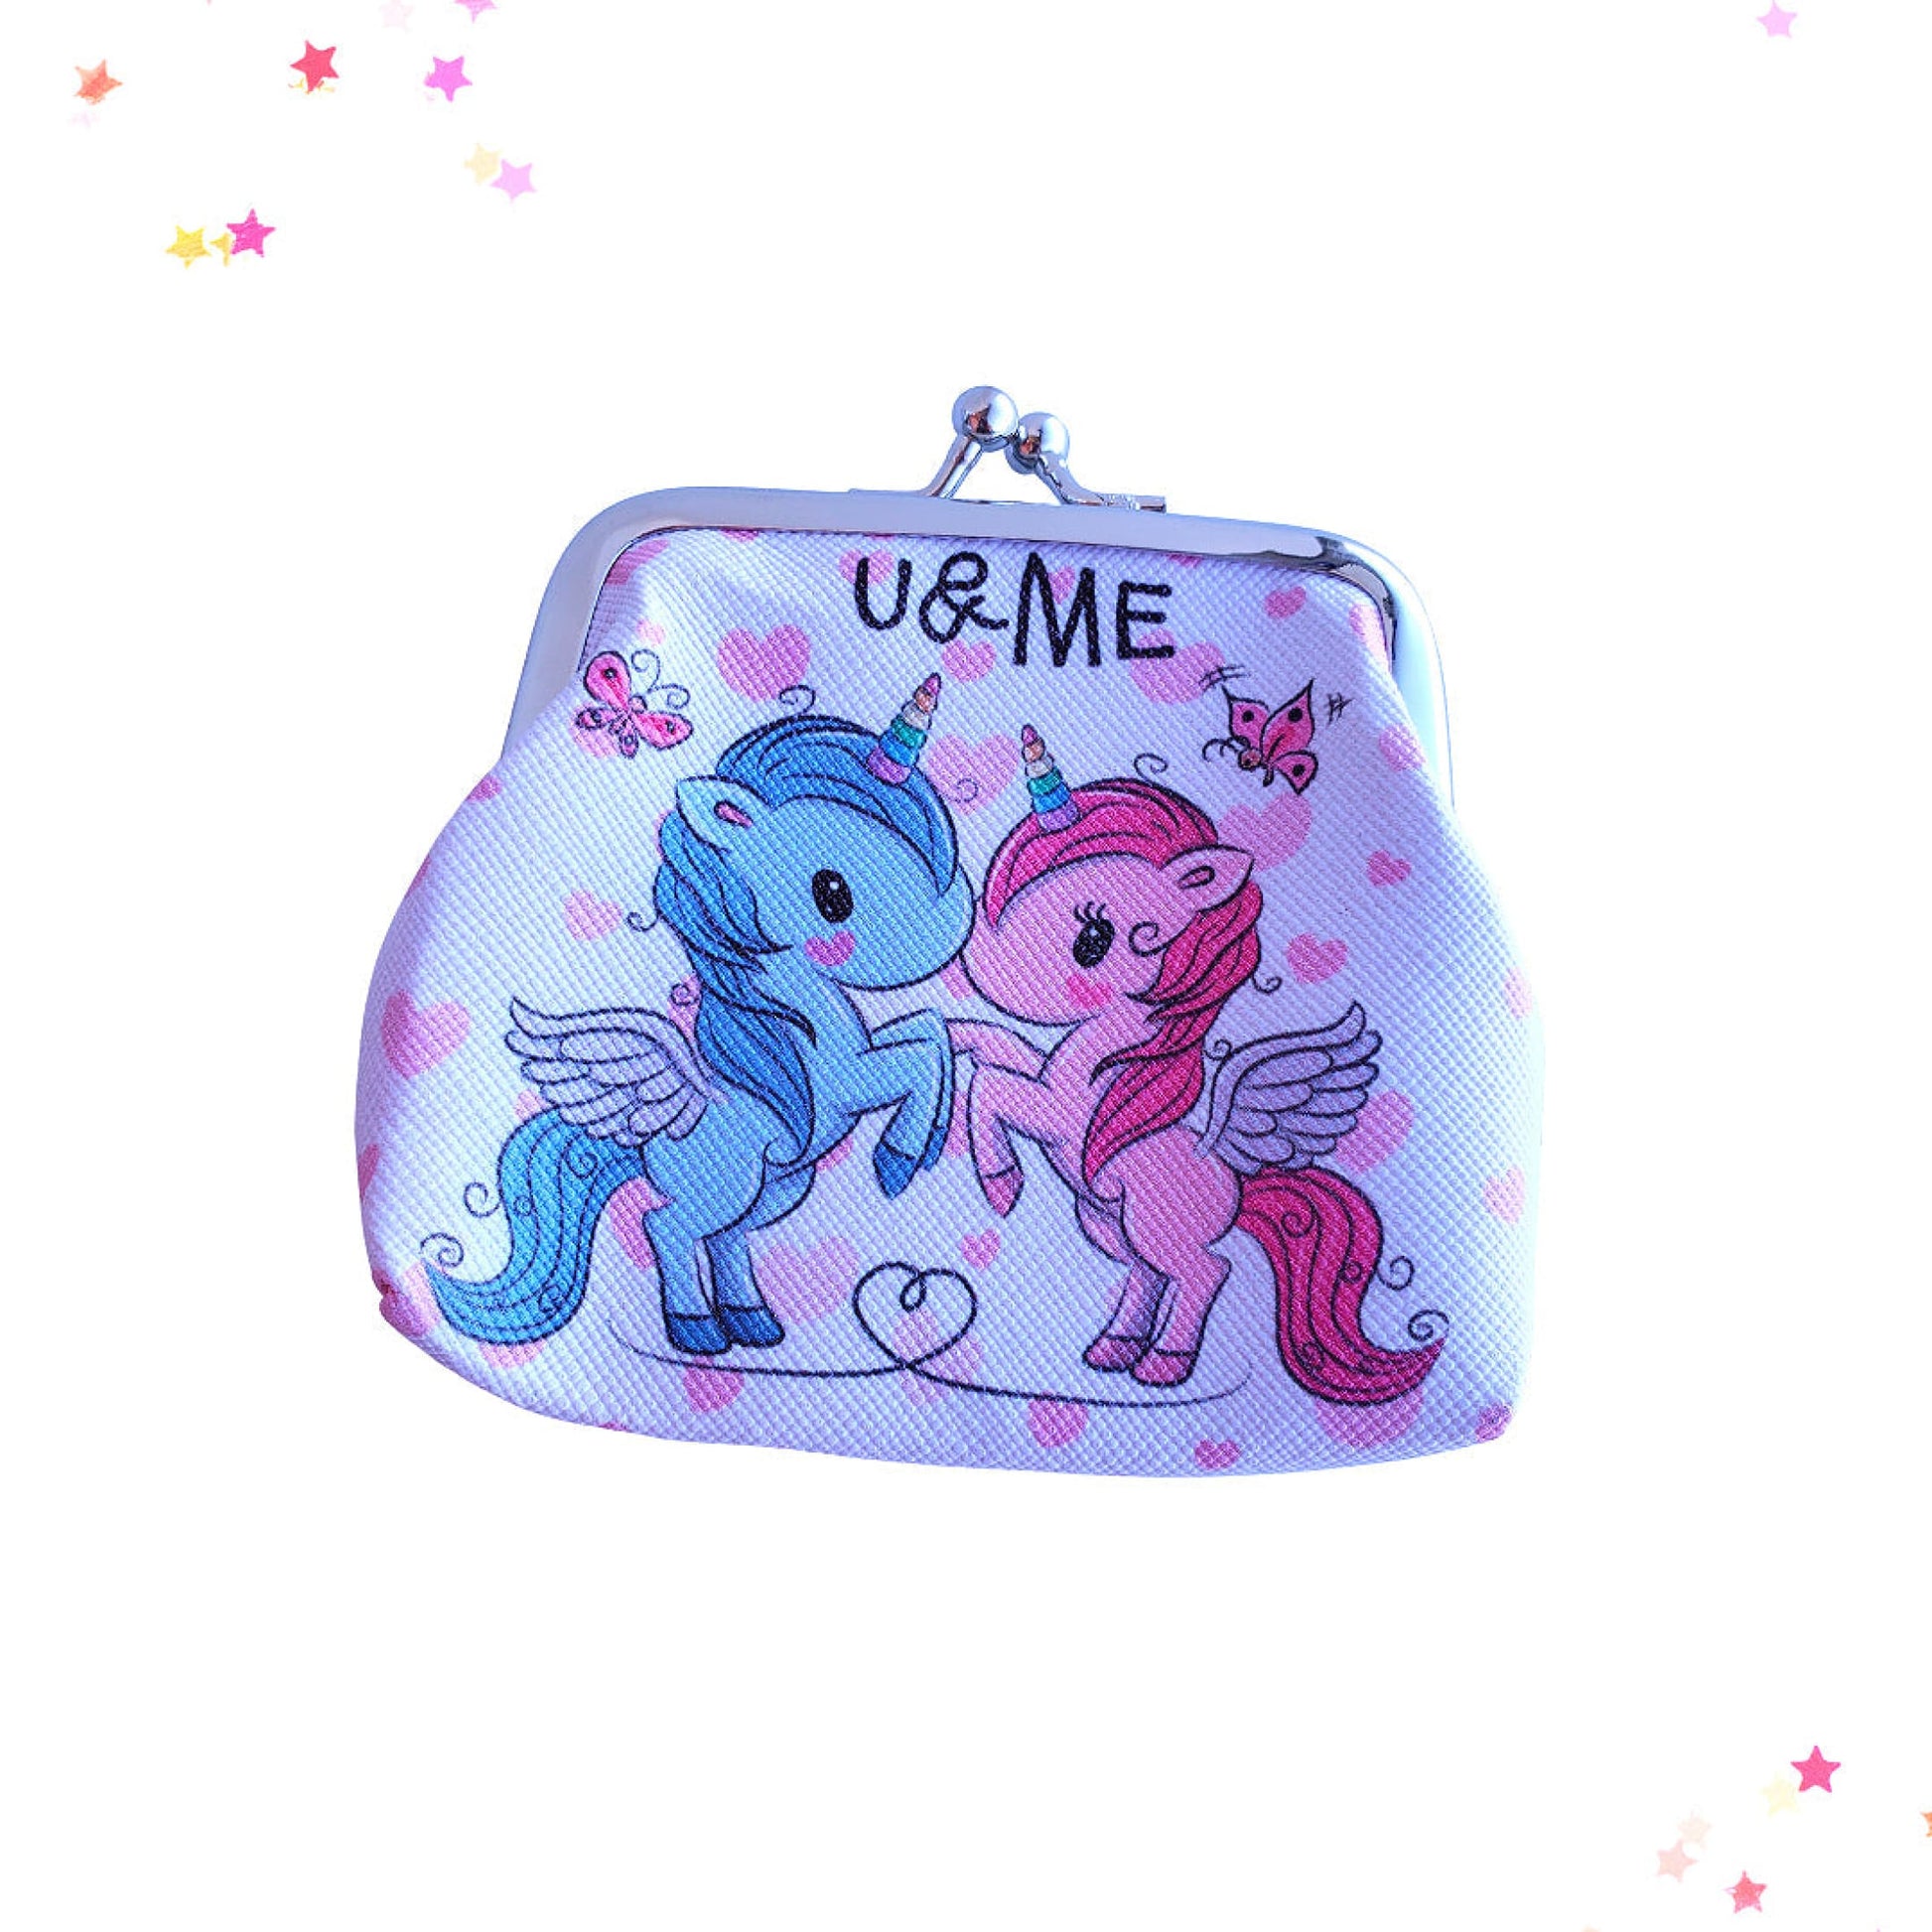 Easy-Open Unicorn Coin Purse in Duo from Confetti Kitty, Only 4.99